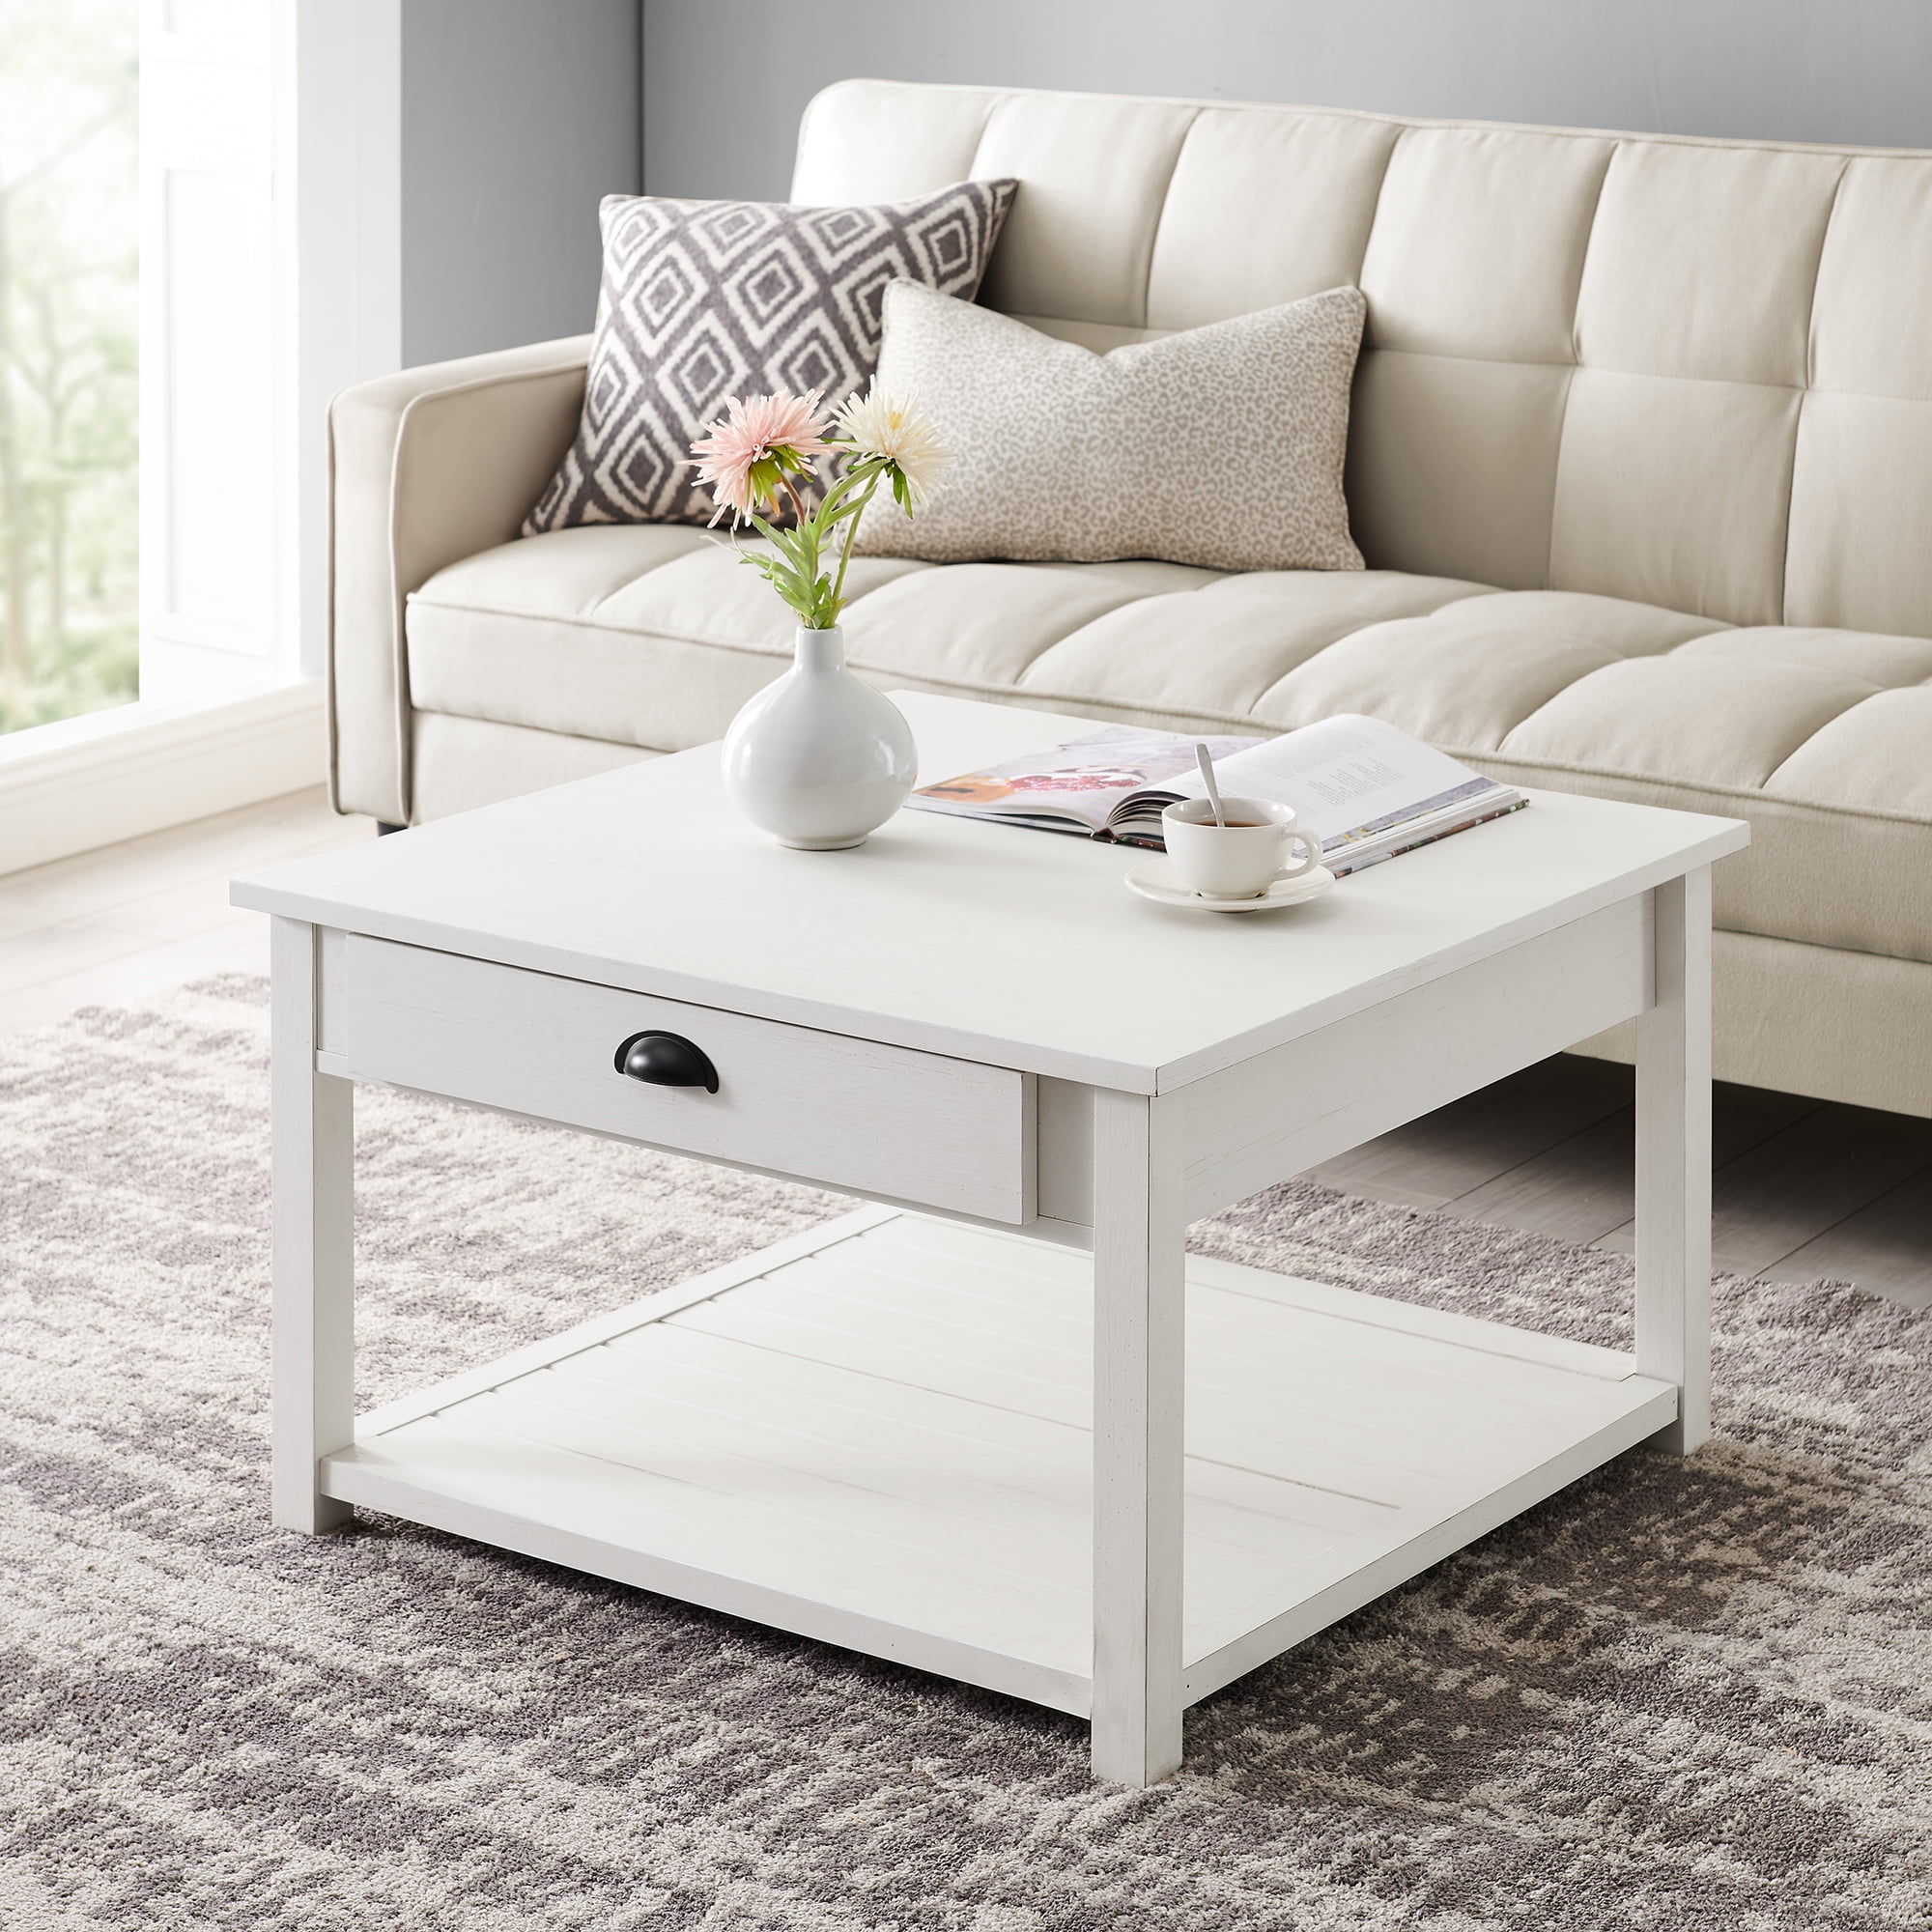 Manor Park 30 Inch Square Country Coffee Table